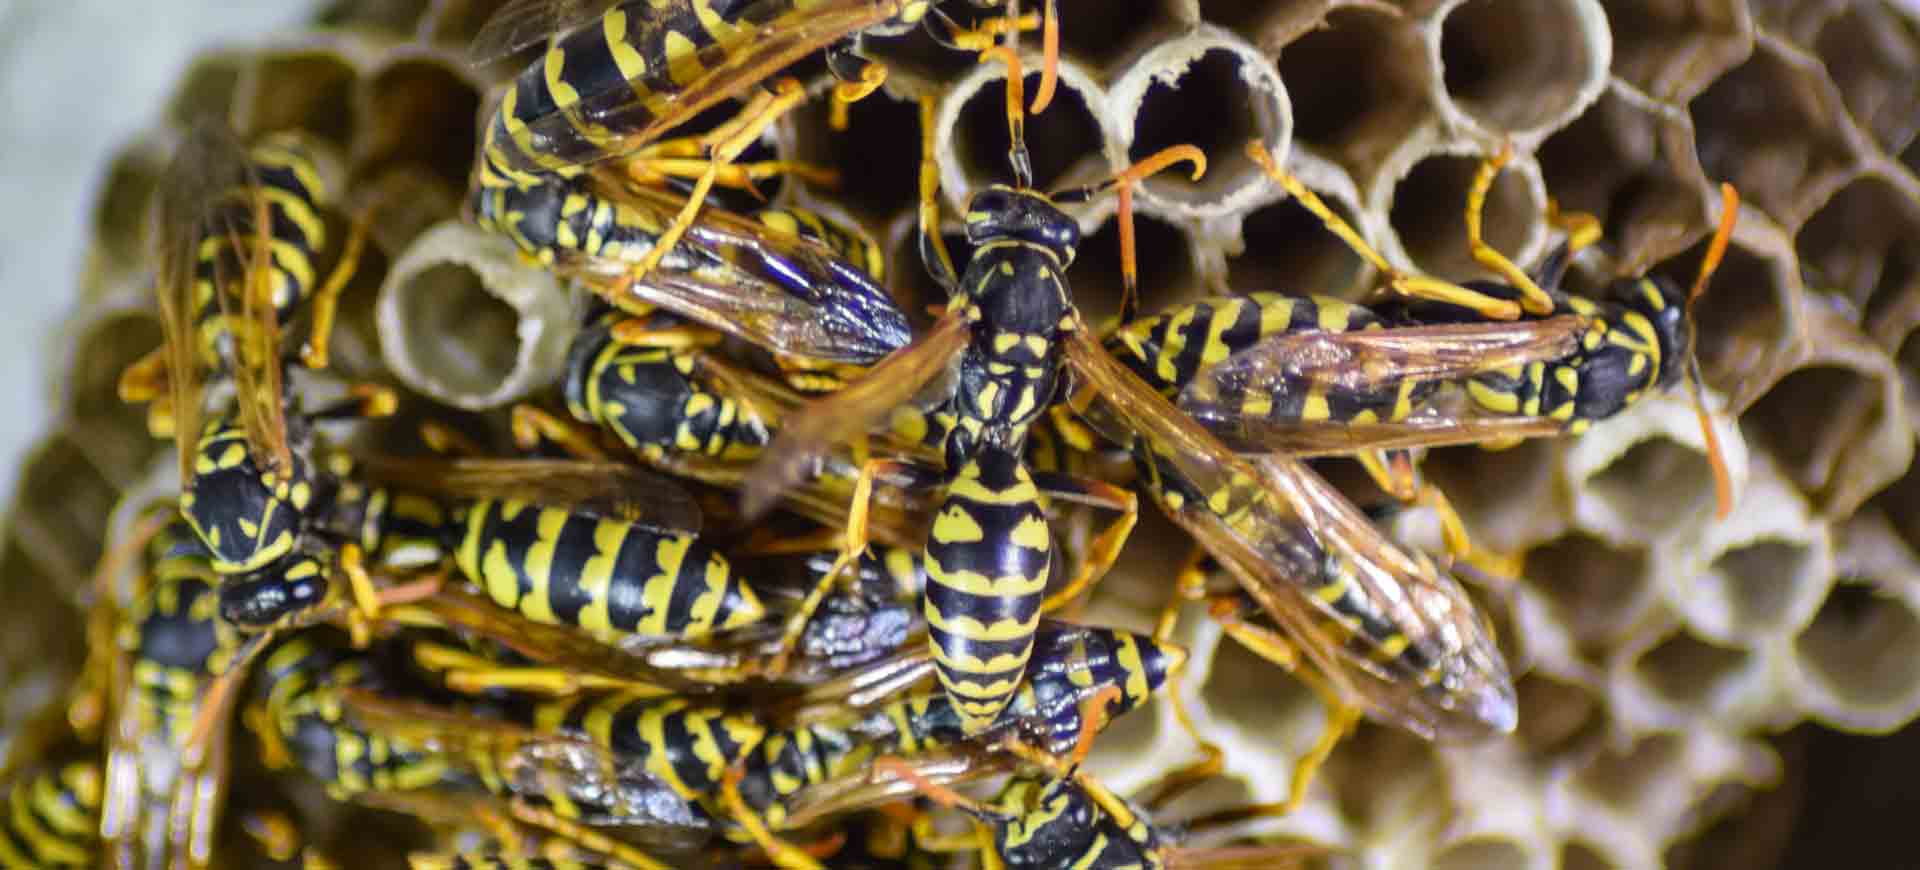 wasp pest control national city